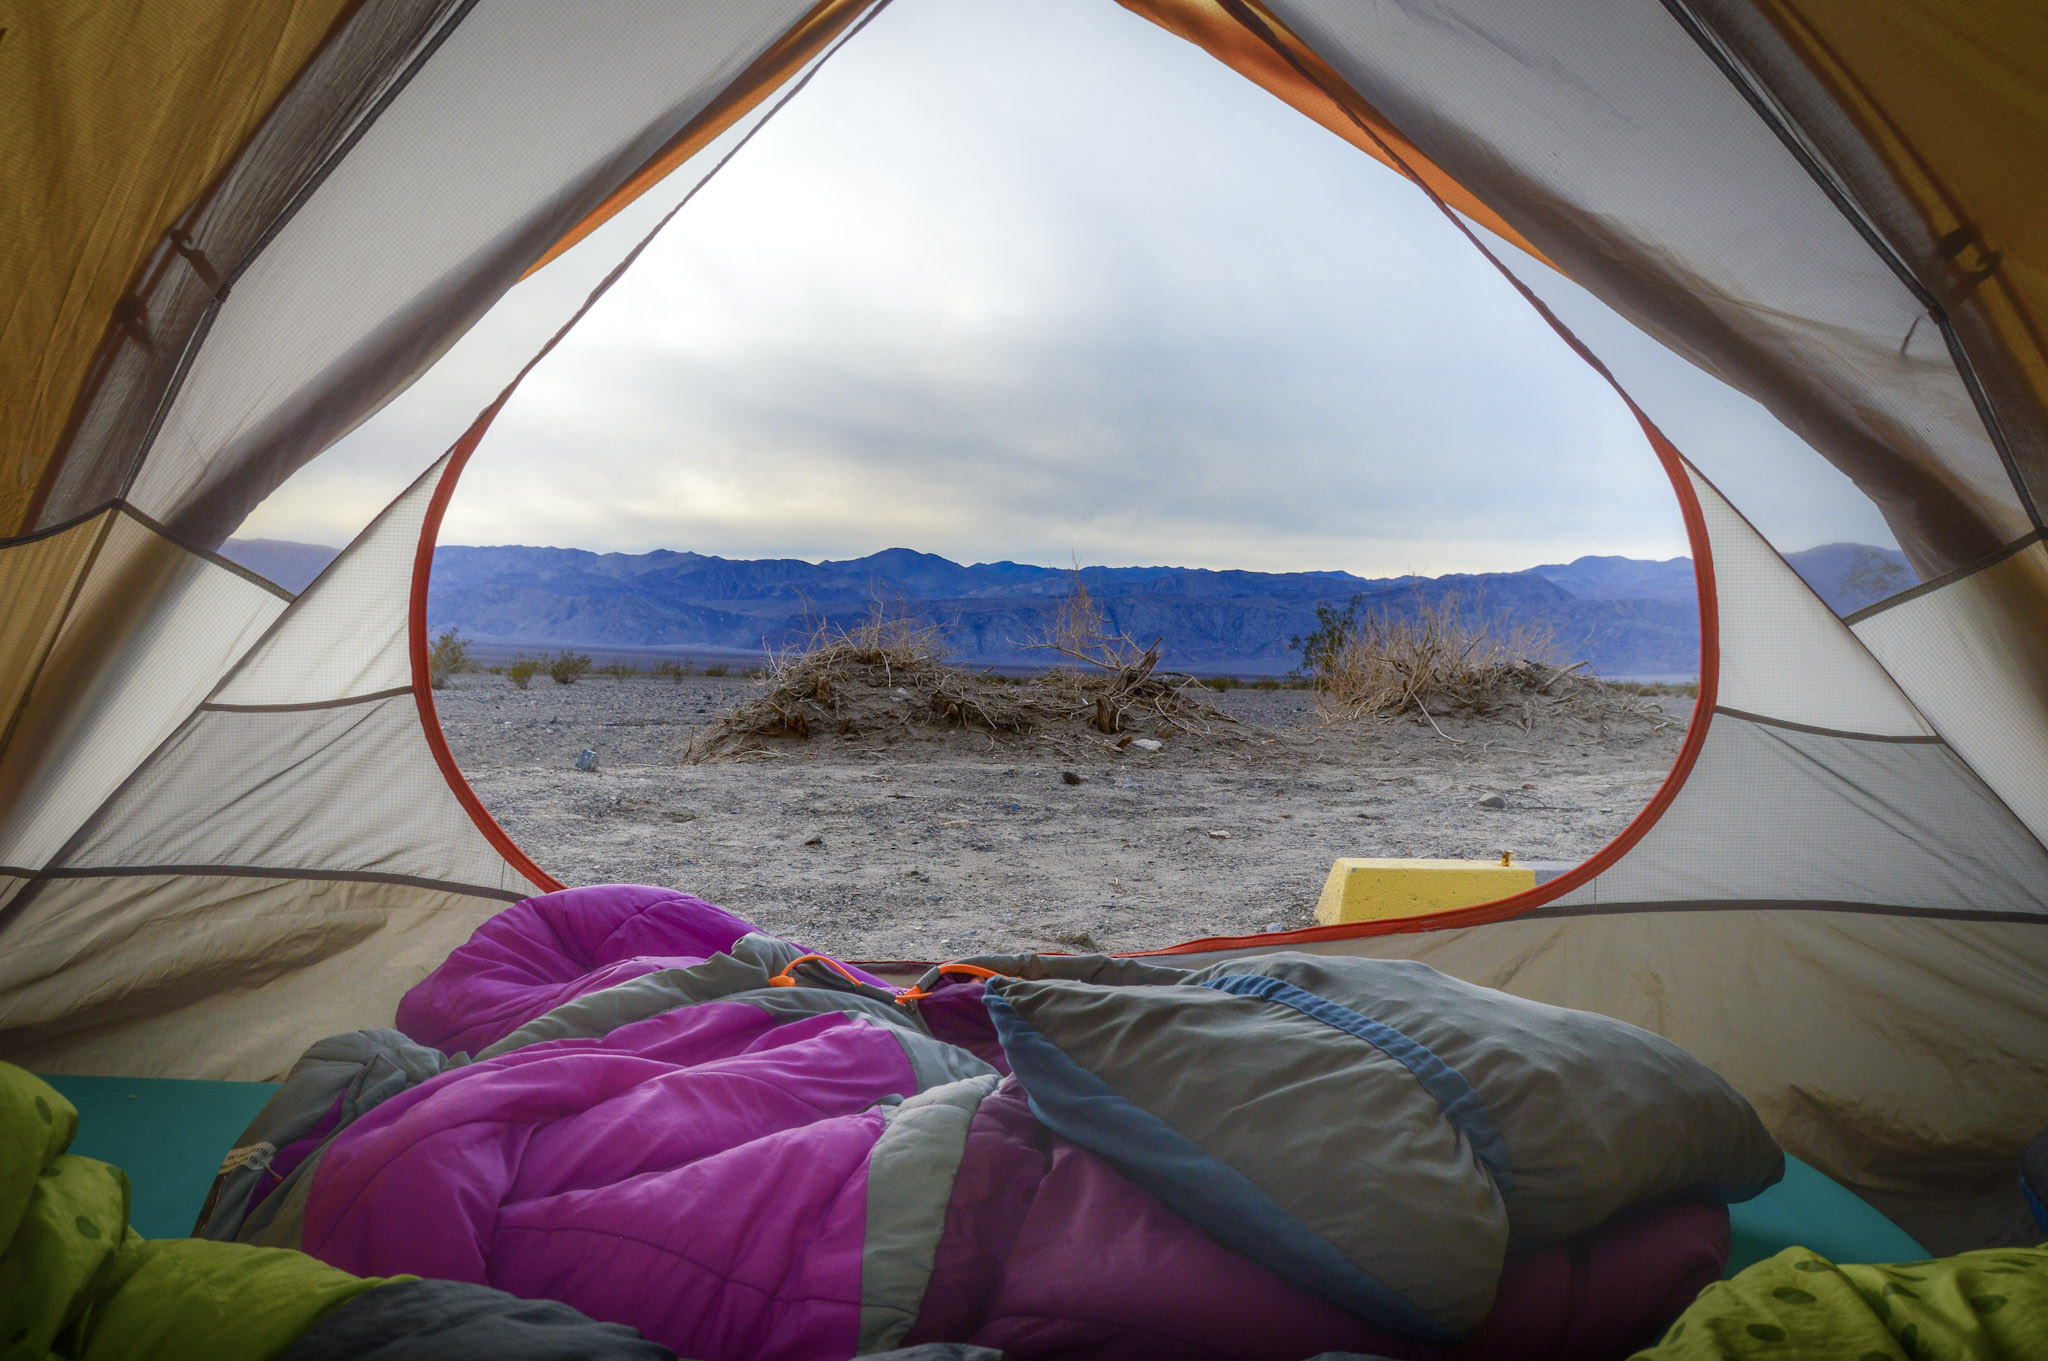 Learn what you should bring for Camping Essentials when staying in National Parks. What to pack for camping - These are important items for your camping checklist: Tent | Sleeping Bag | Sleeping Pad | Camping Pillow | Headlamp| + all other gear essentials for what to bring camping for beginners.